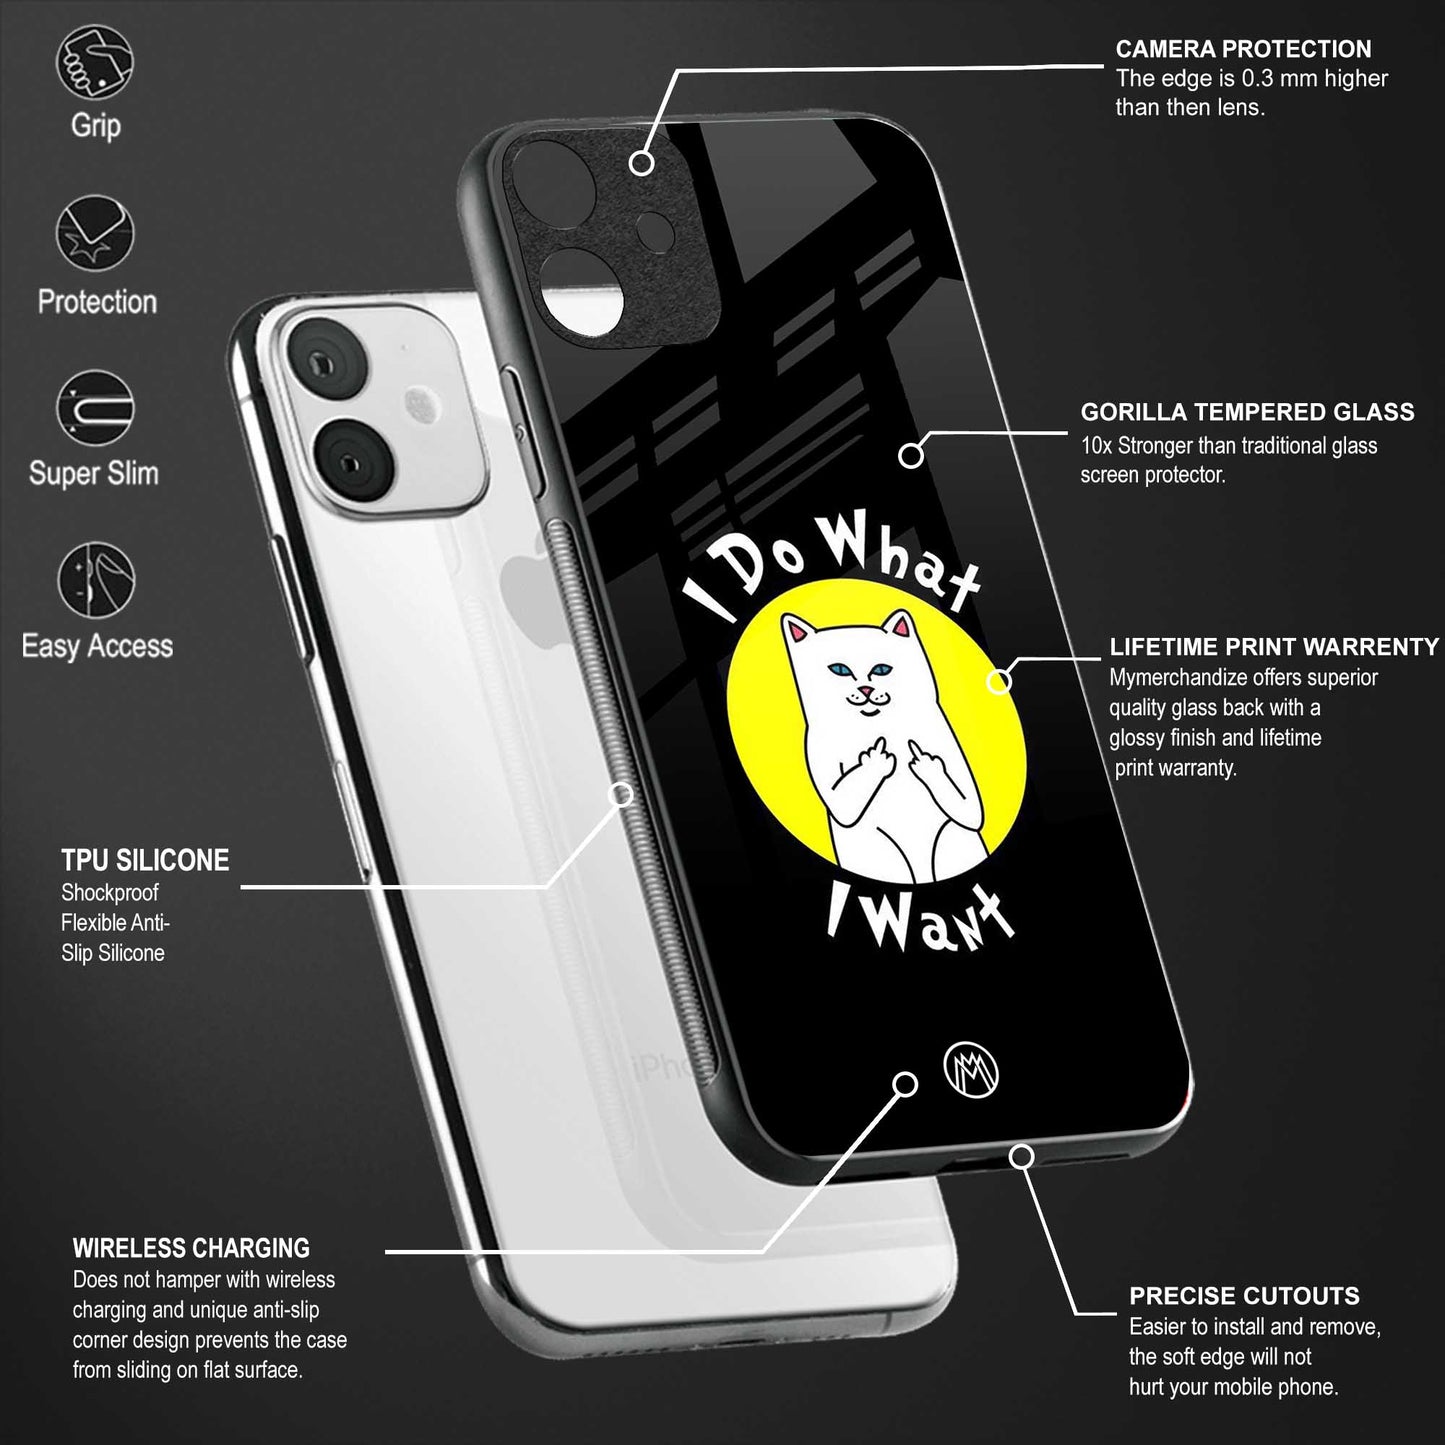 i do what i want glass case for vivo y91i